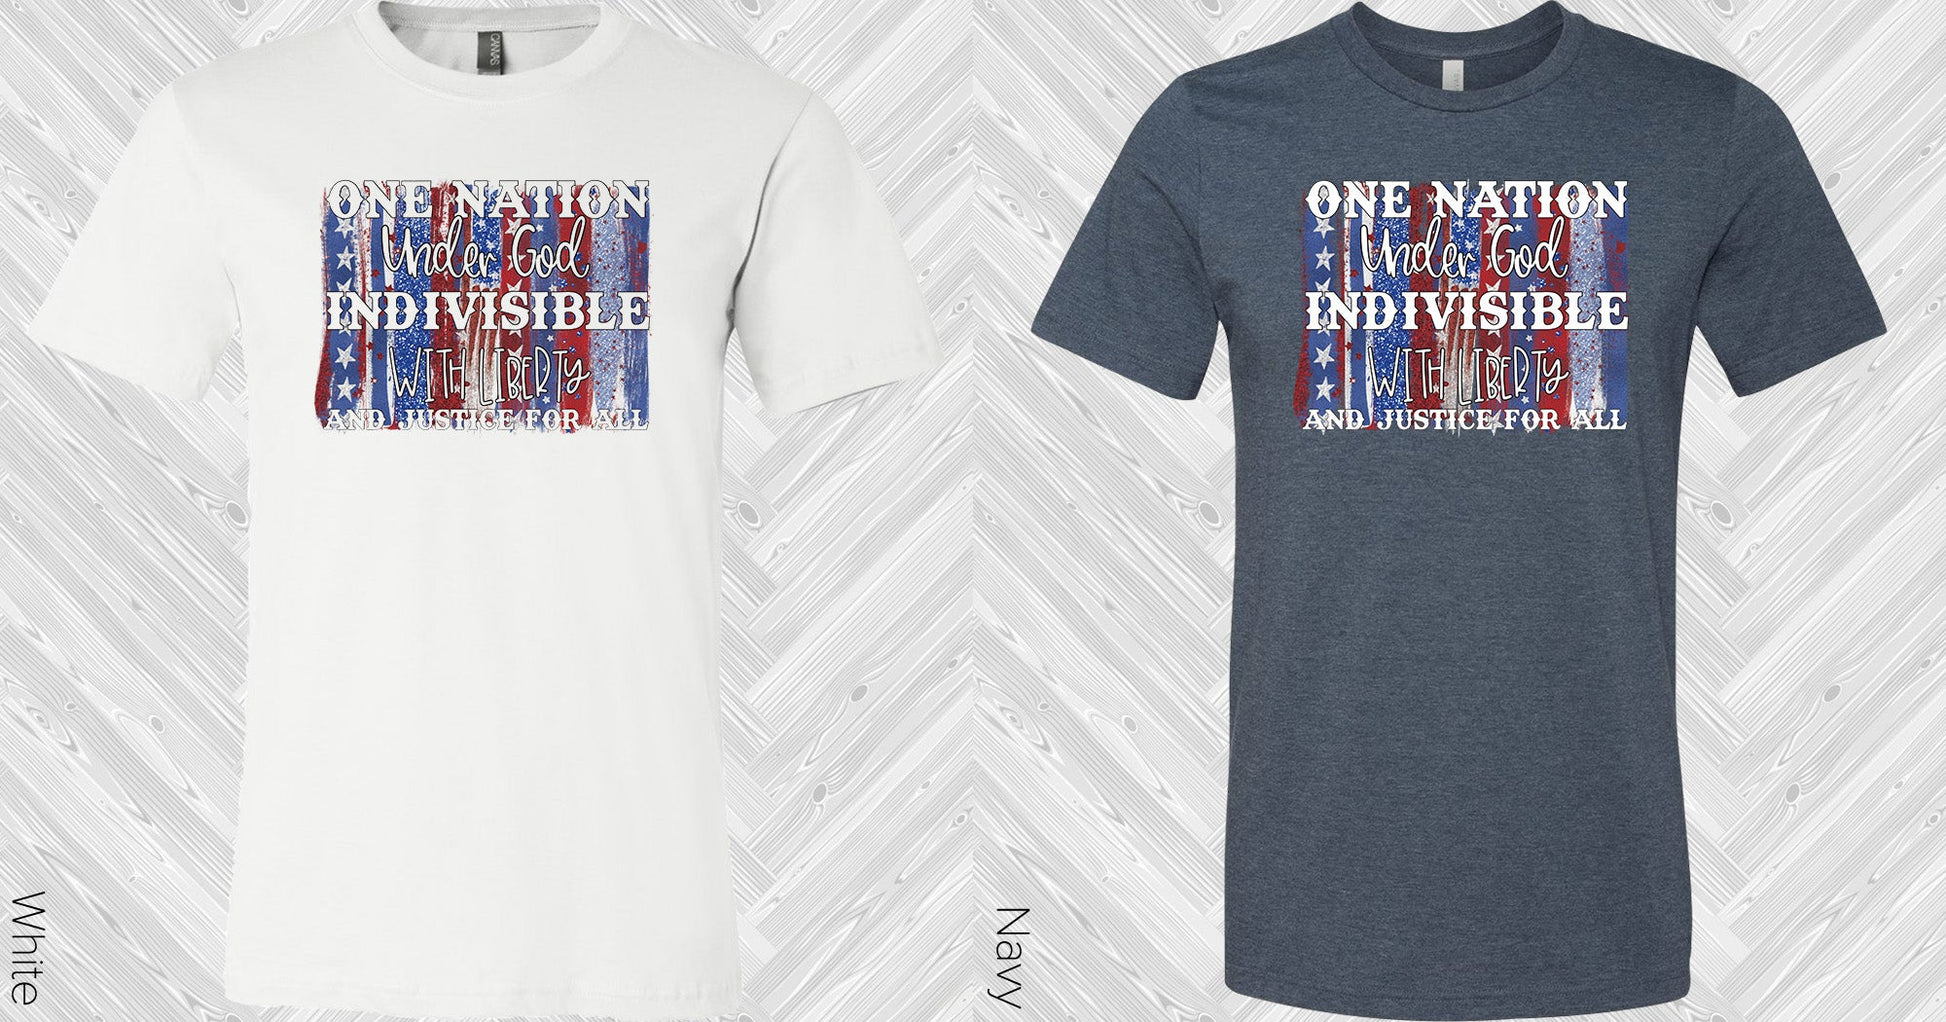 One Nation Under God Indivisible With Liberty And Justice For All Graphic Tee Graphic Tee